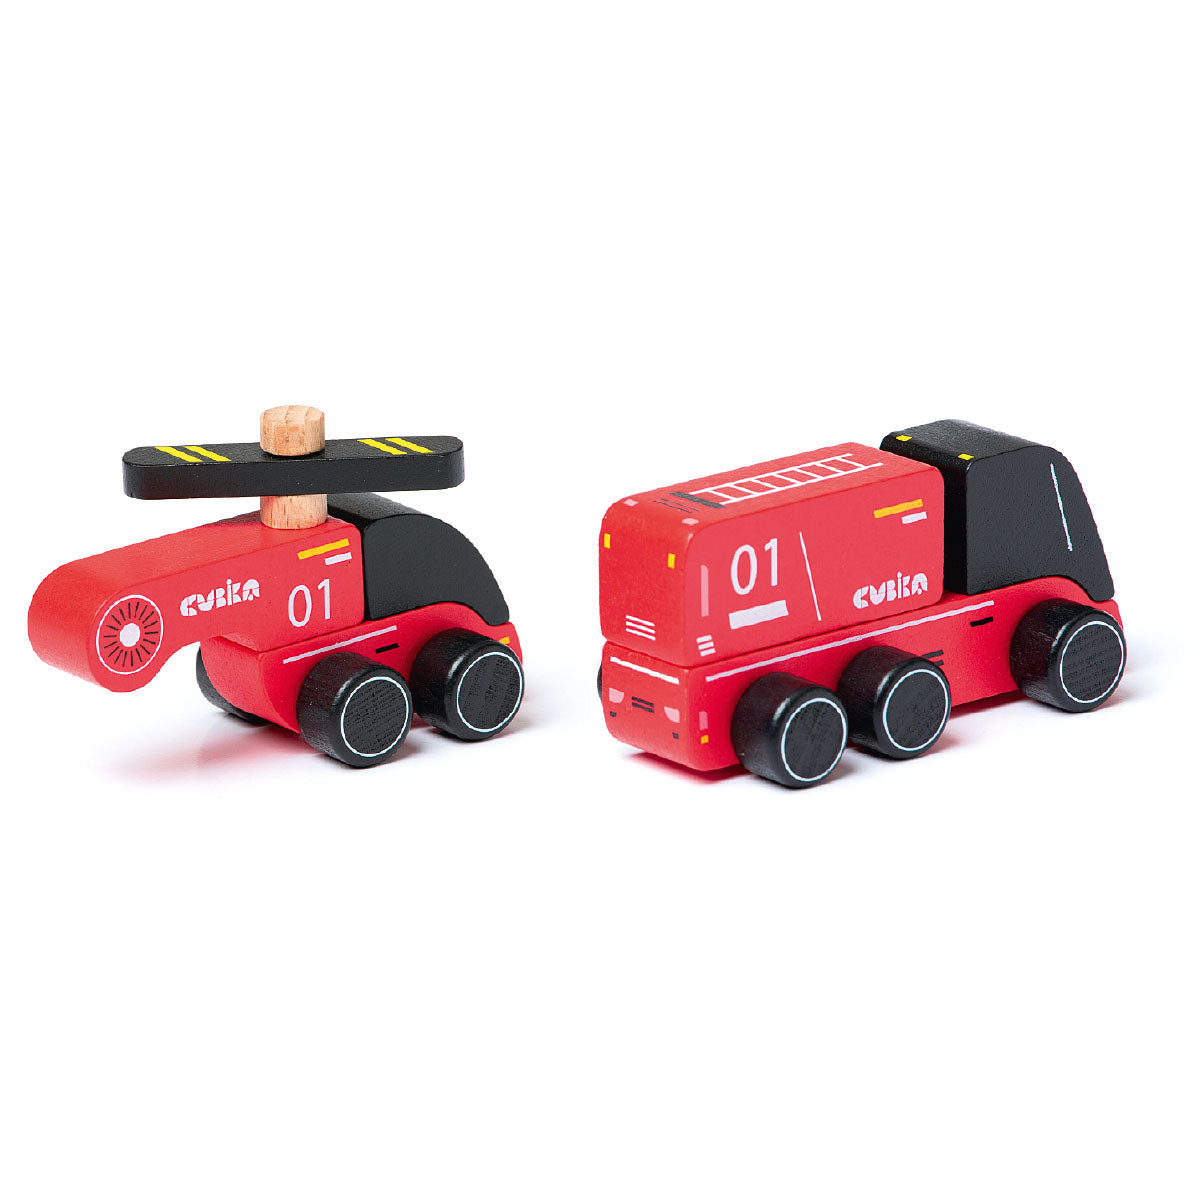 Wise Elk/Cubika Wooden Toy - Vehicle Set Fire Fighters